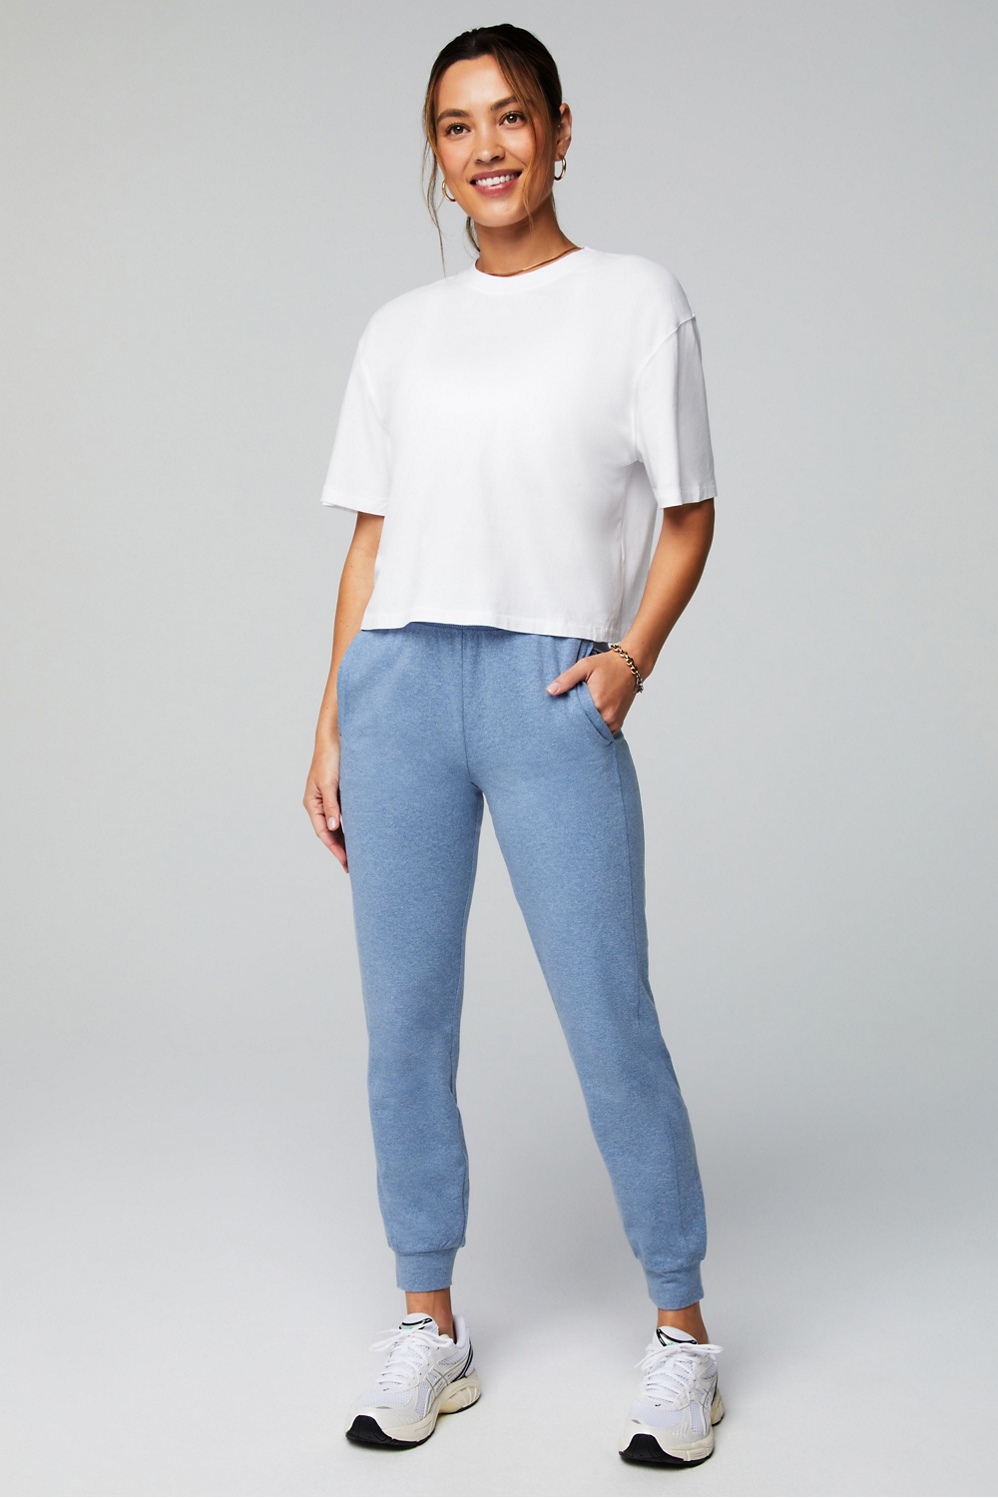 Cropped Tee - Fabletics